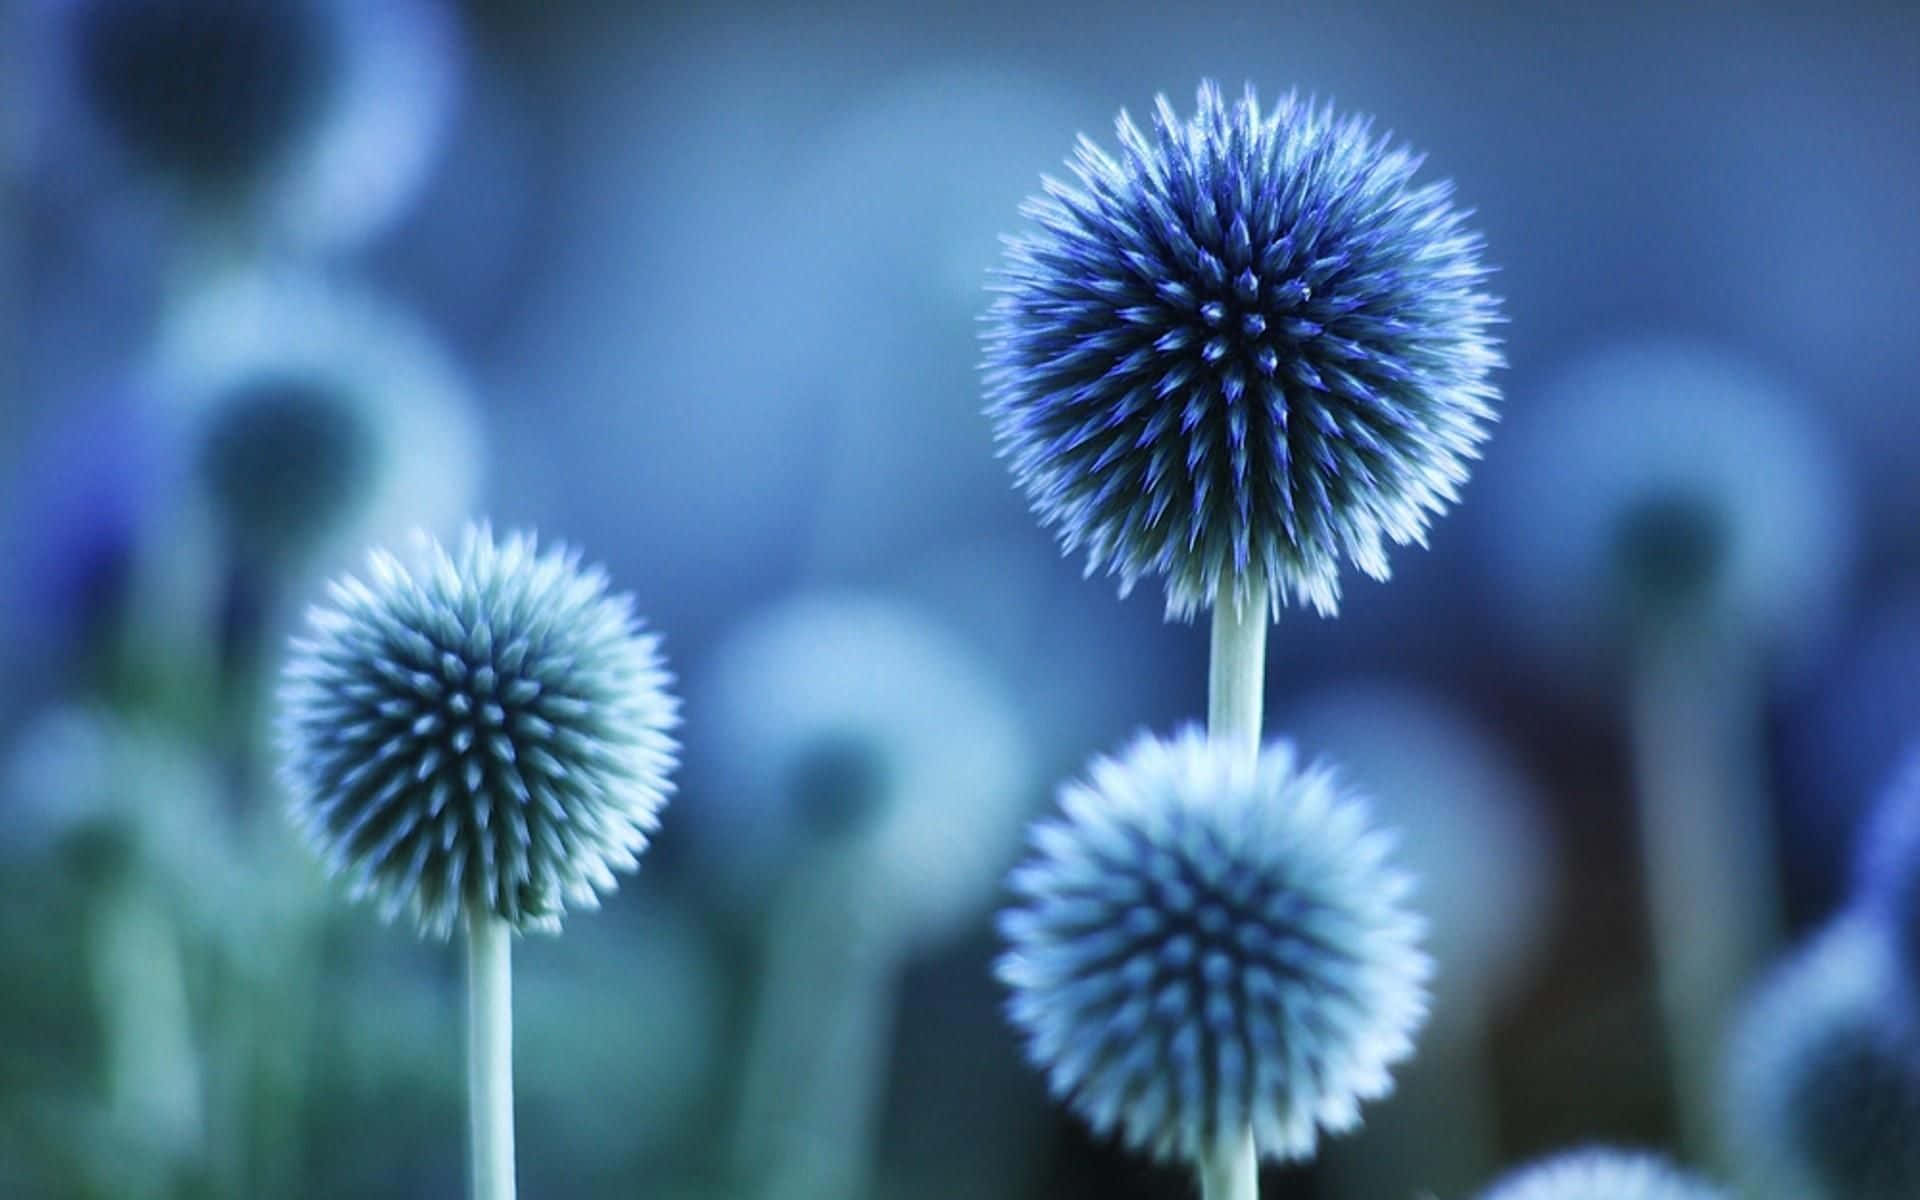 A blue flower blooming against a soft green background Wallpaper